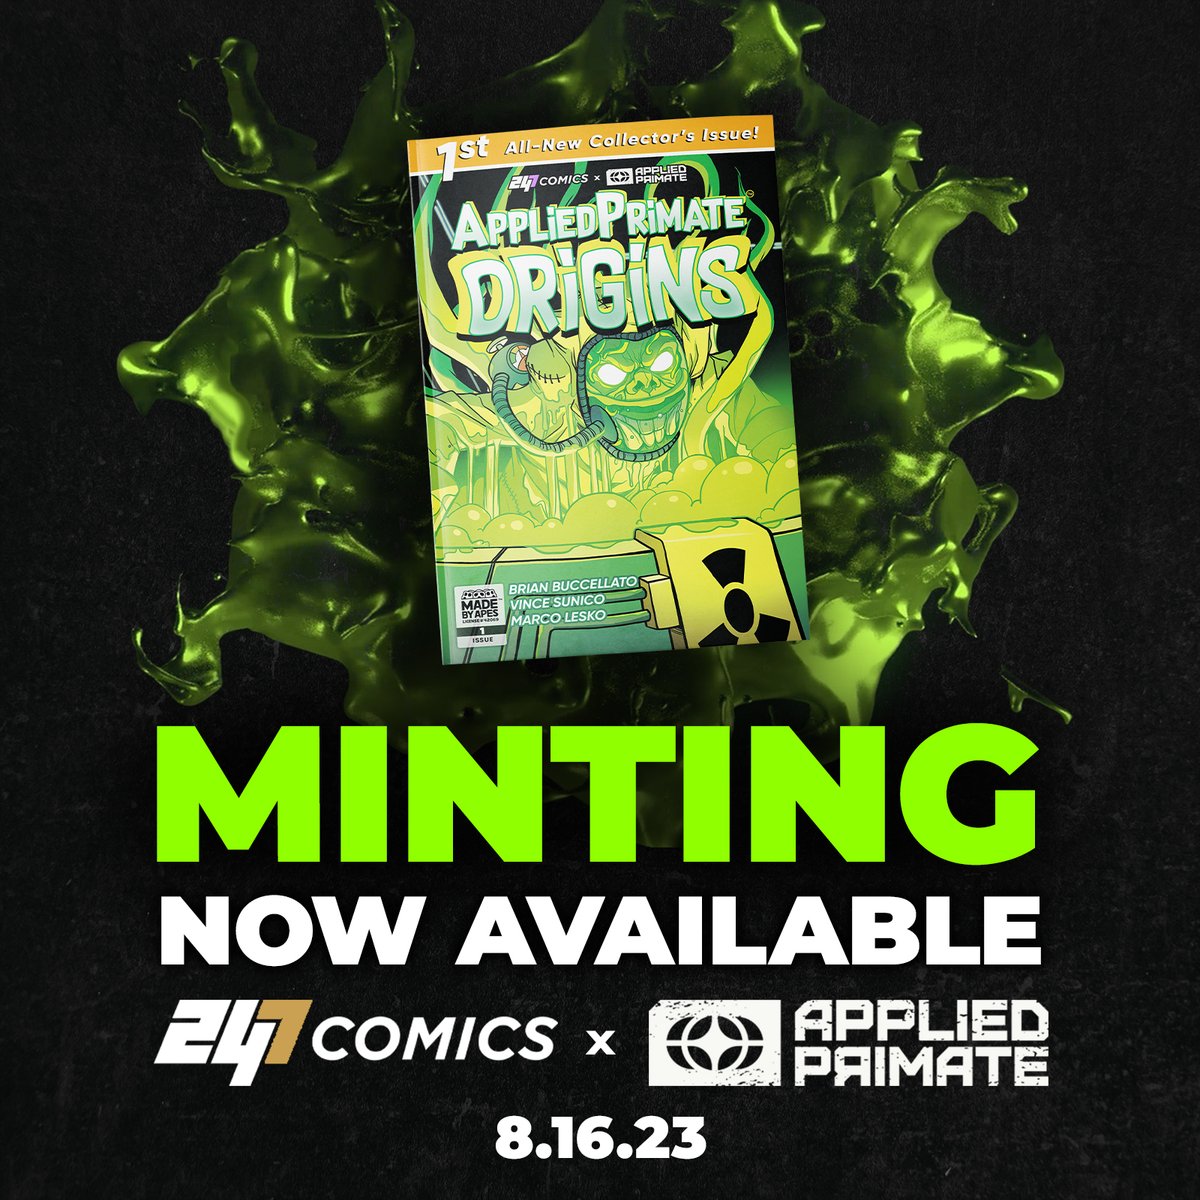 🔬 @AppliedPrimate Origins Public Mint is NOW LIVE! ⏳ Only 1 hour remains to secure your copy of our comic book. Minting exclusively at 247comics.com/mint-apo ⚡